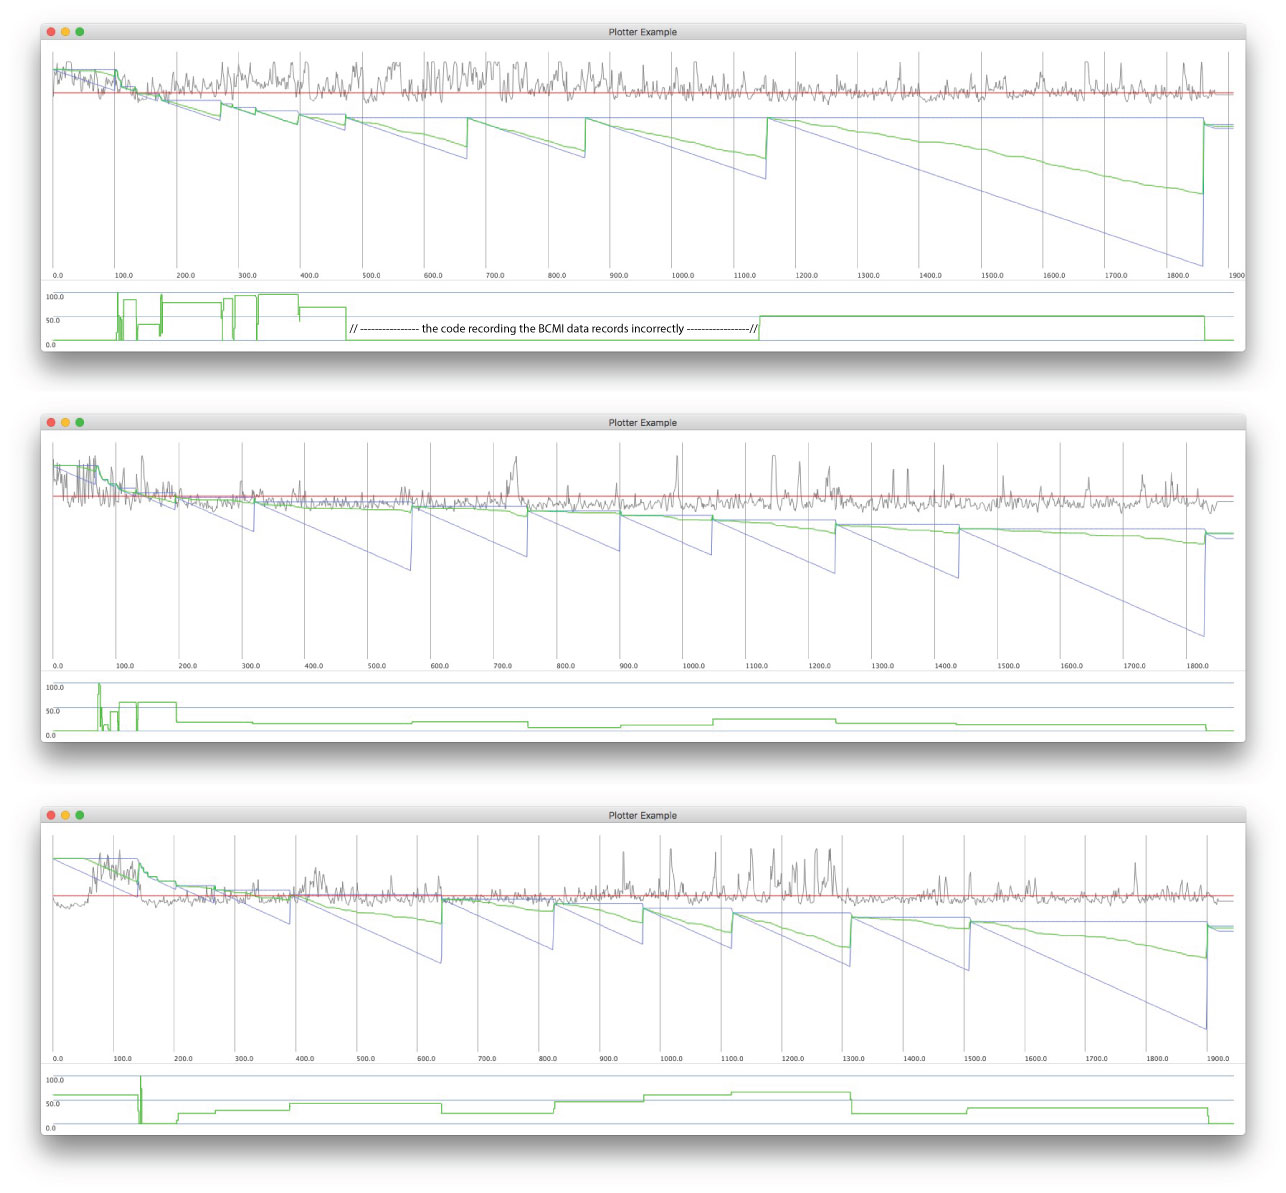 BCMI data plots from sessions B1 (top), B2 (middle) and B3 (bottom). The top part of each plot shows (1) theta median at Fz (wiggly grey lines), (2) neurofeedback threshold (red horizontal lines), (3) soundscape level durations (blue triangles) and (4) averaged neurofeedback success rates for each level (green lines in the blue triangles). The closer the green line gets to the bottom right corner of the blue triangle, the higher the neurofeedback success rate was in that level. The bottom parts of the plots visualise the success rates again, with higher green steps indicate higher success rates.